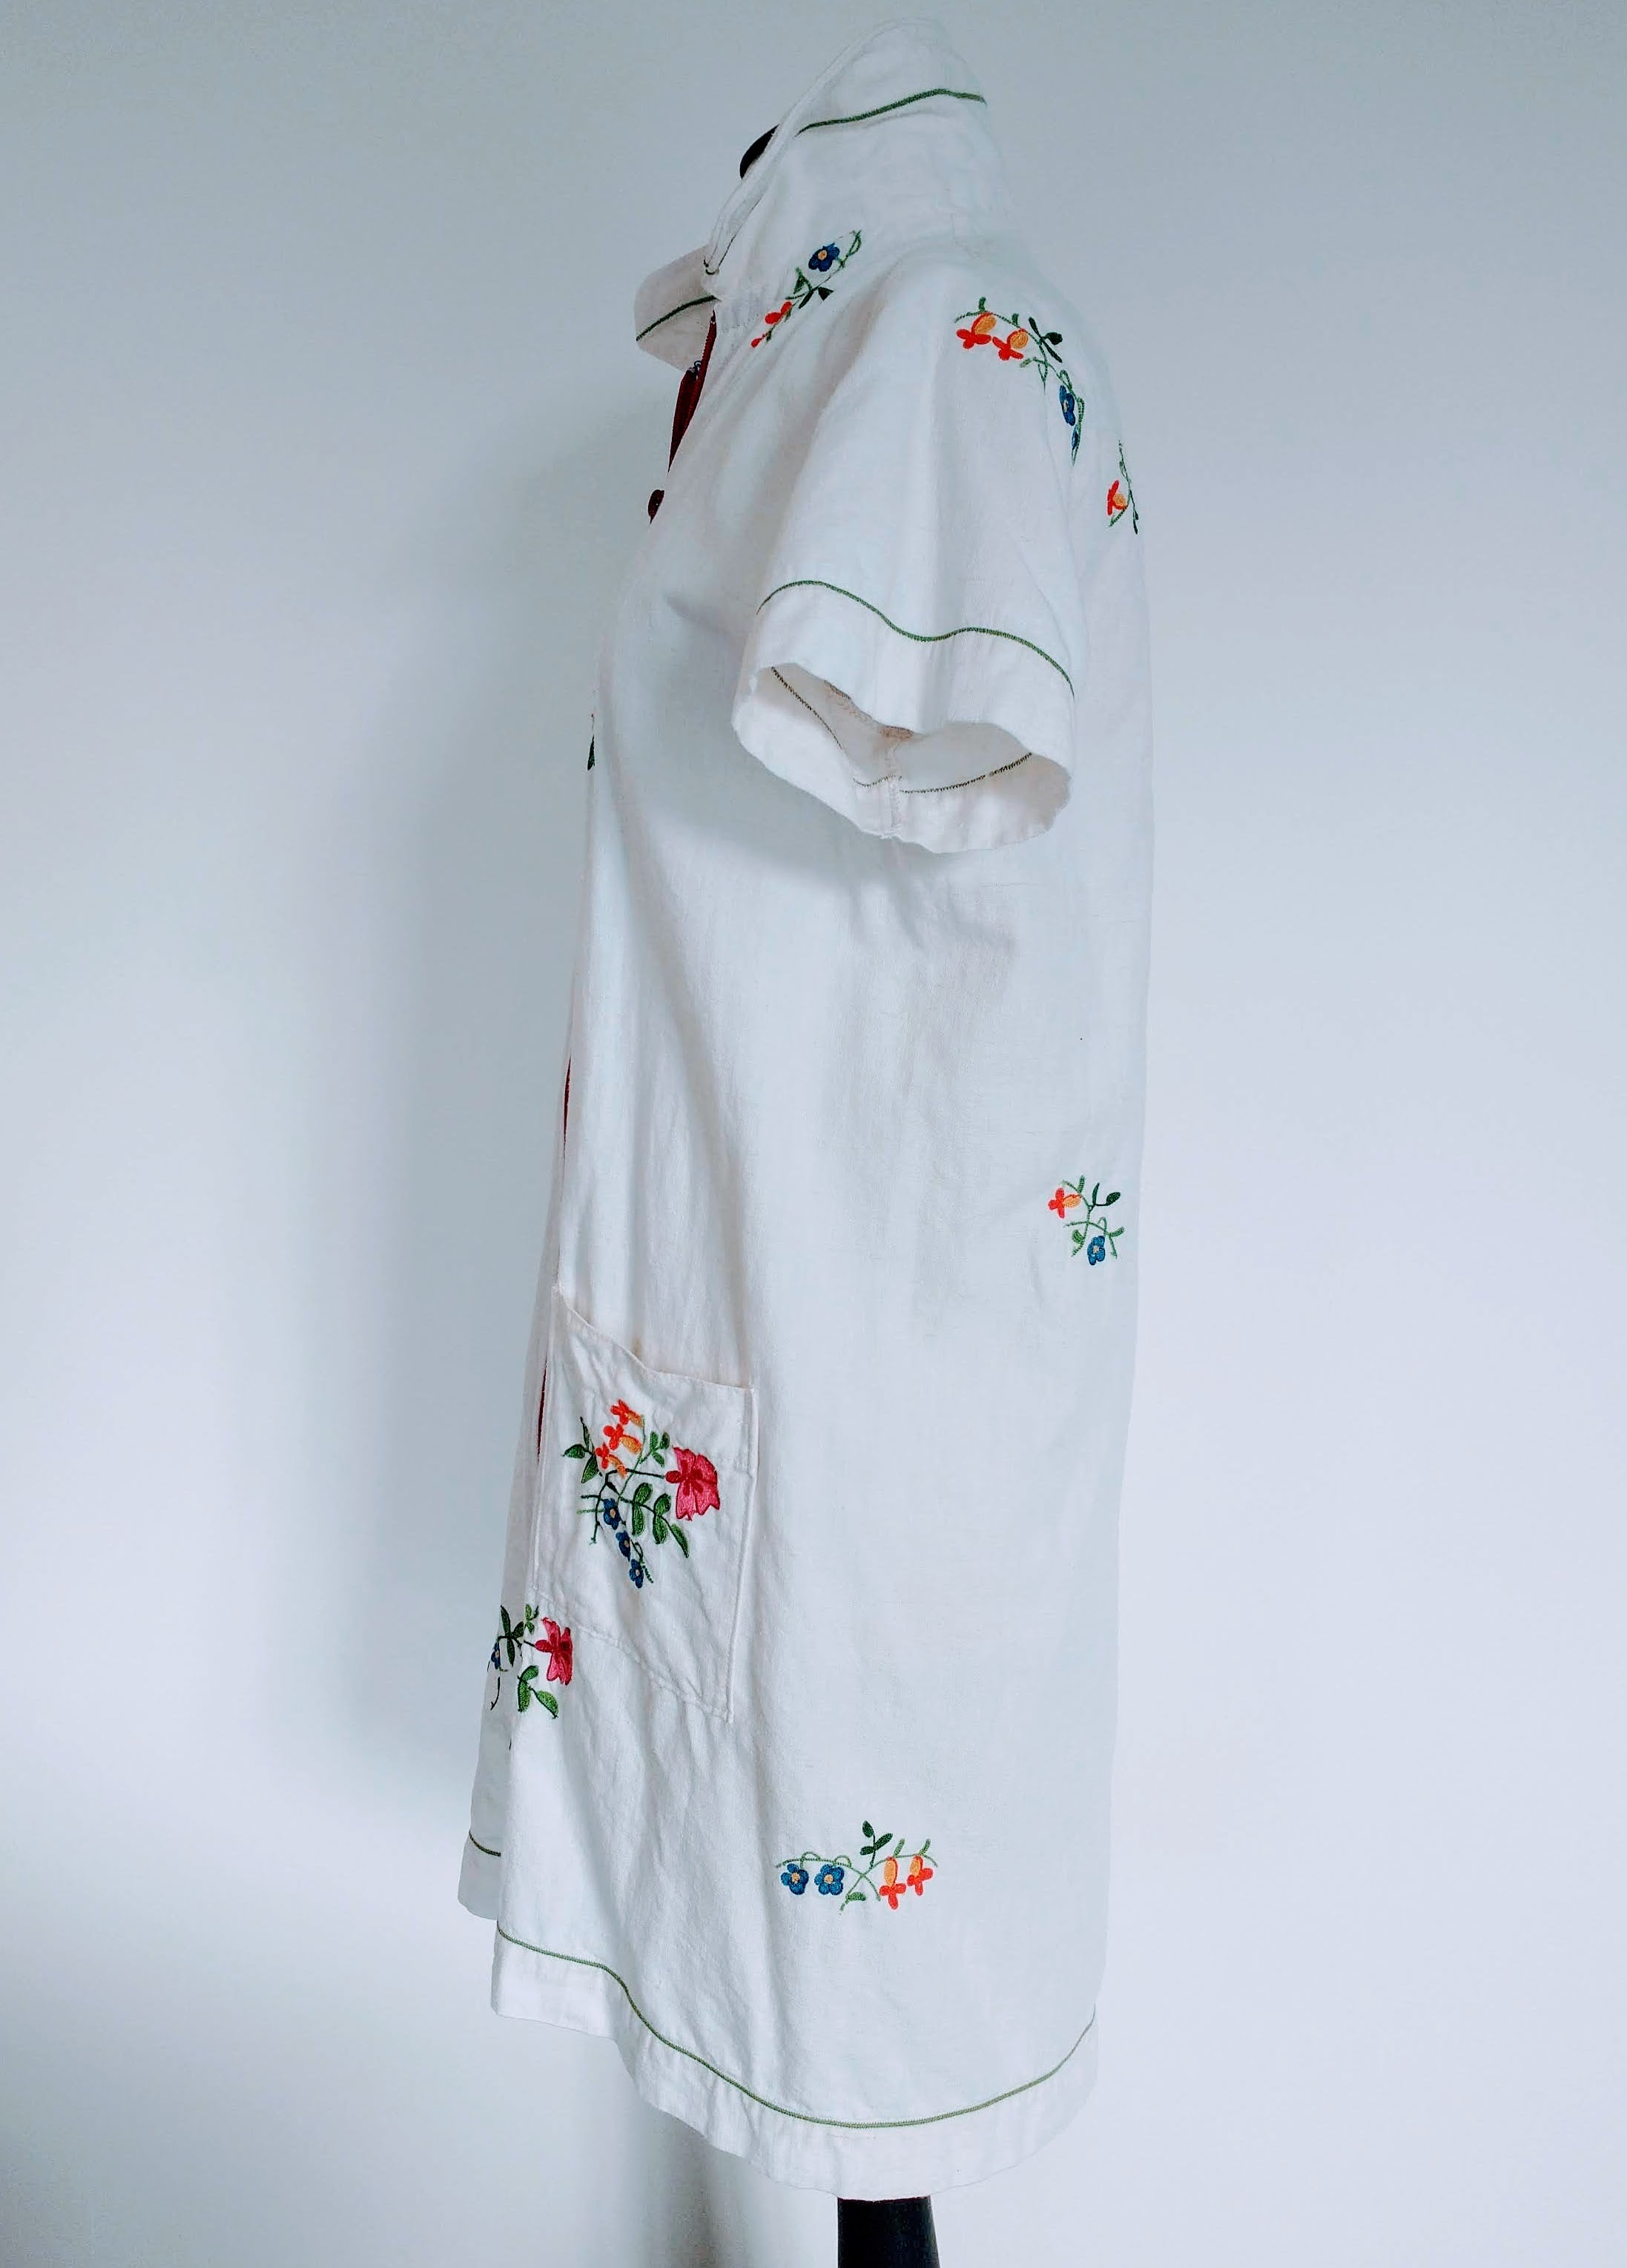 The ROBOUNE in hemp embroidered with flowers